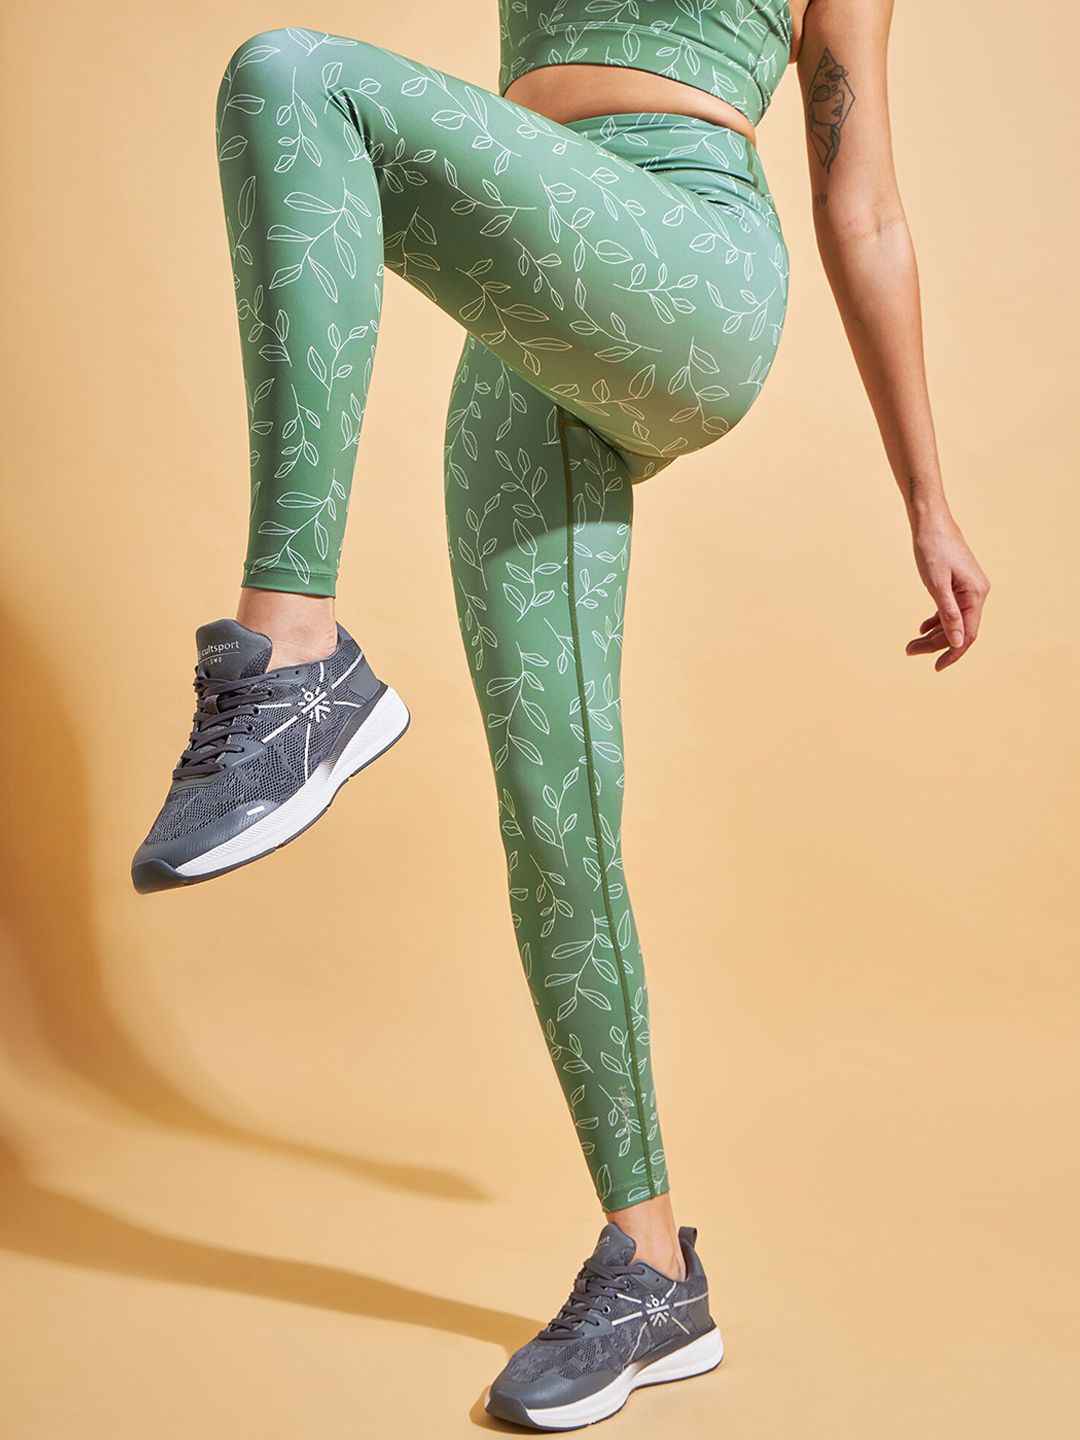 Cultsport Women Olive Green & White Printed Tights Price in India